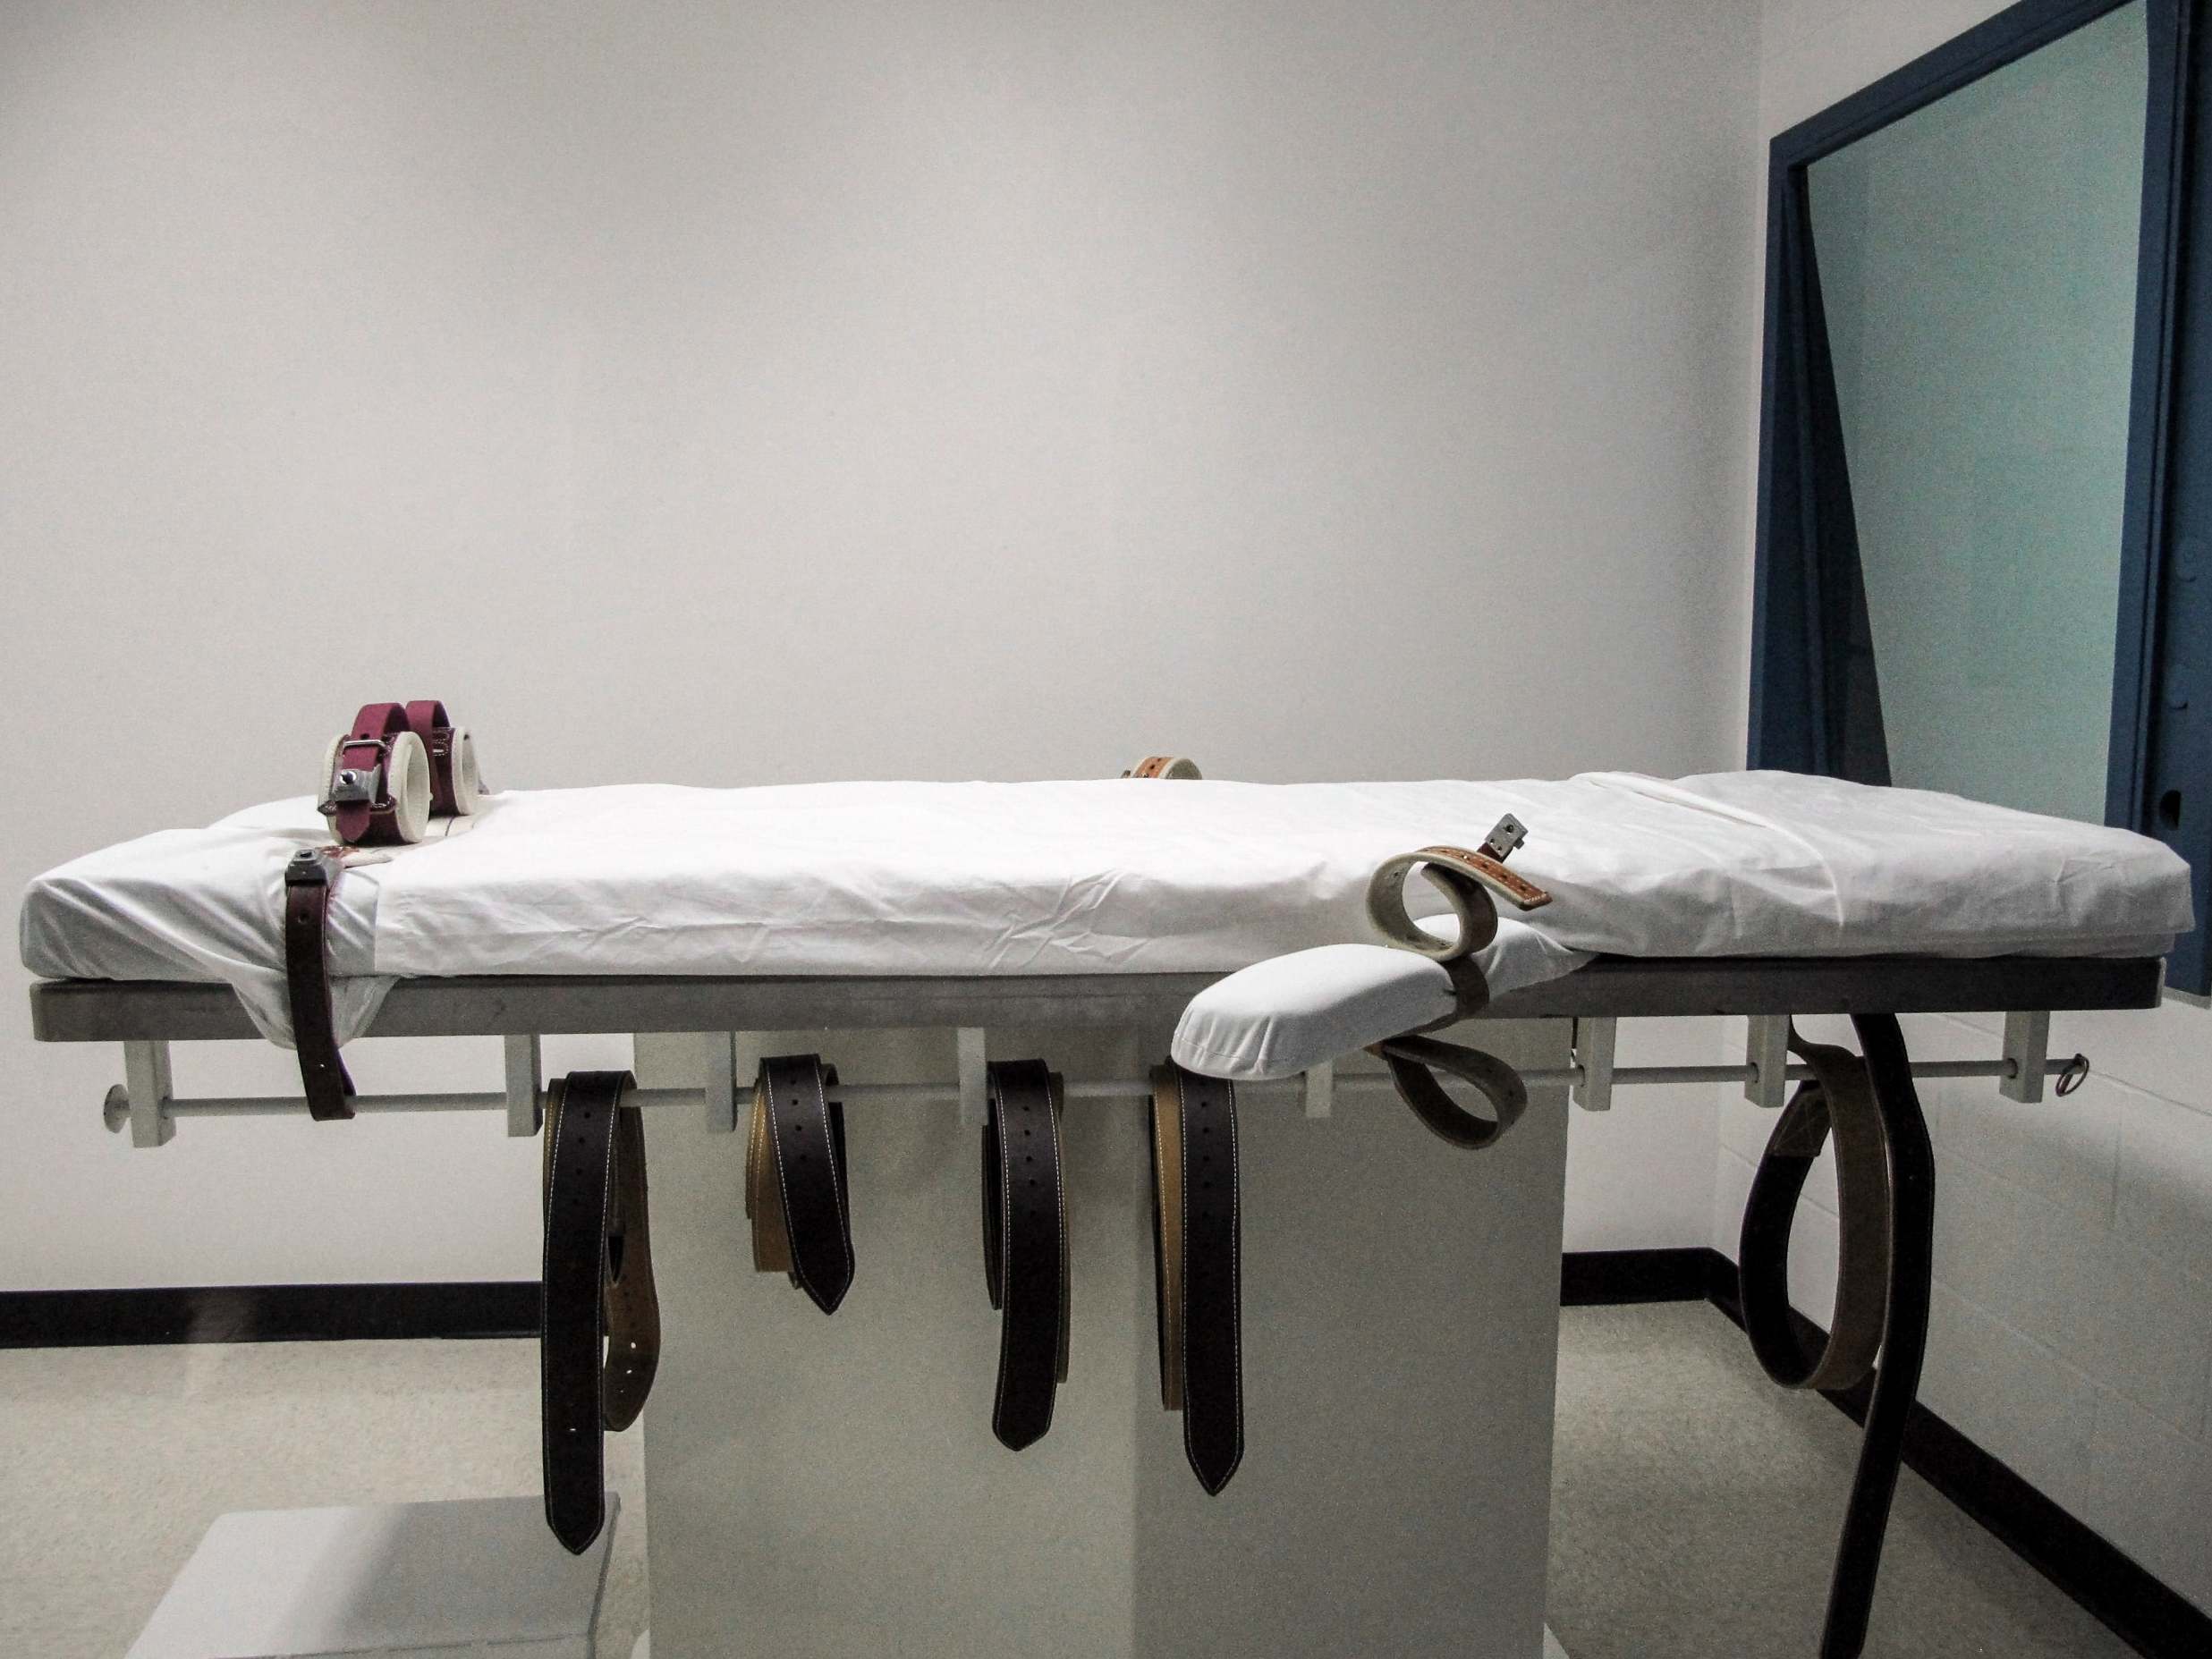 An American lethal injection chamber photographed in 2010